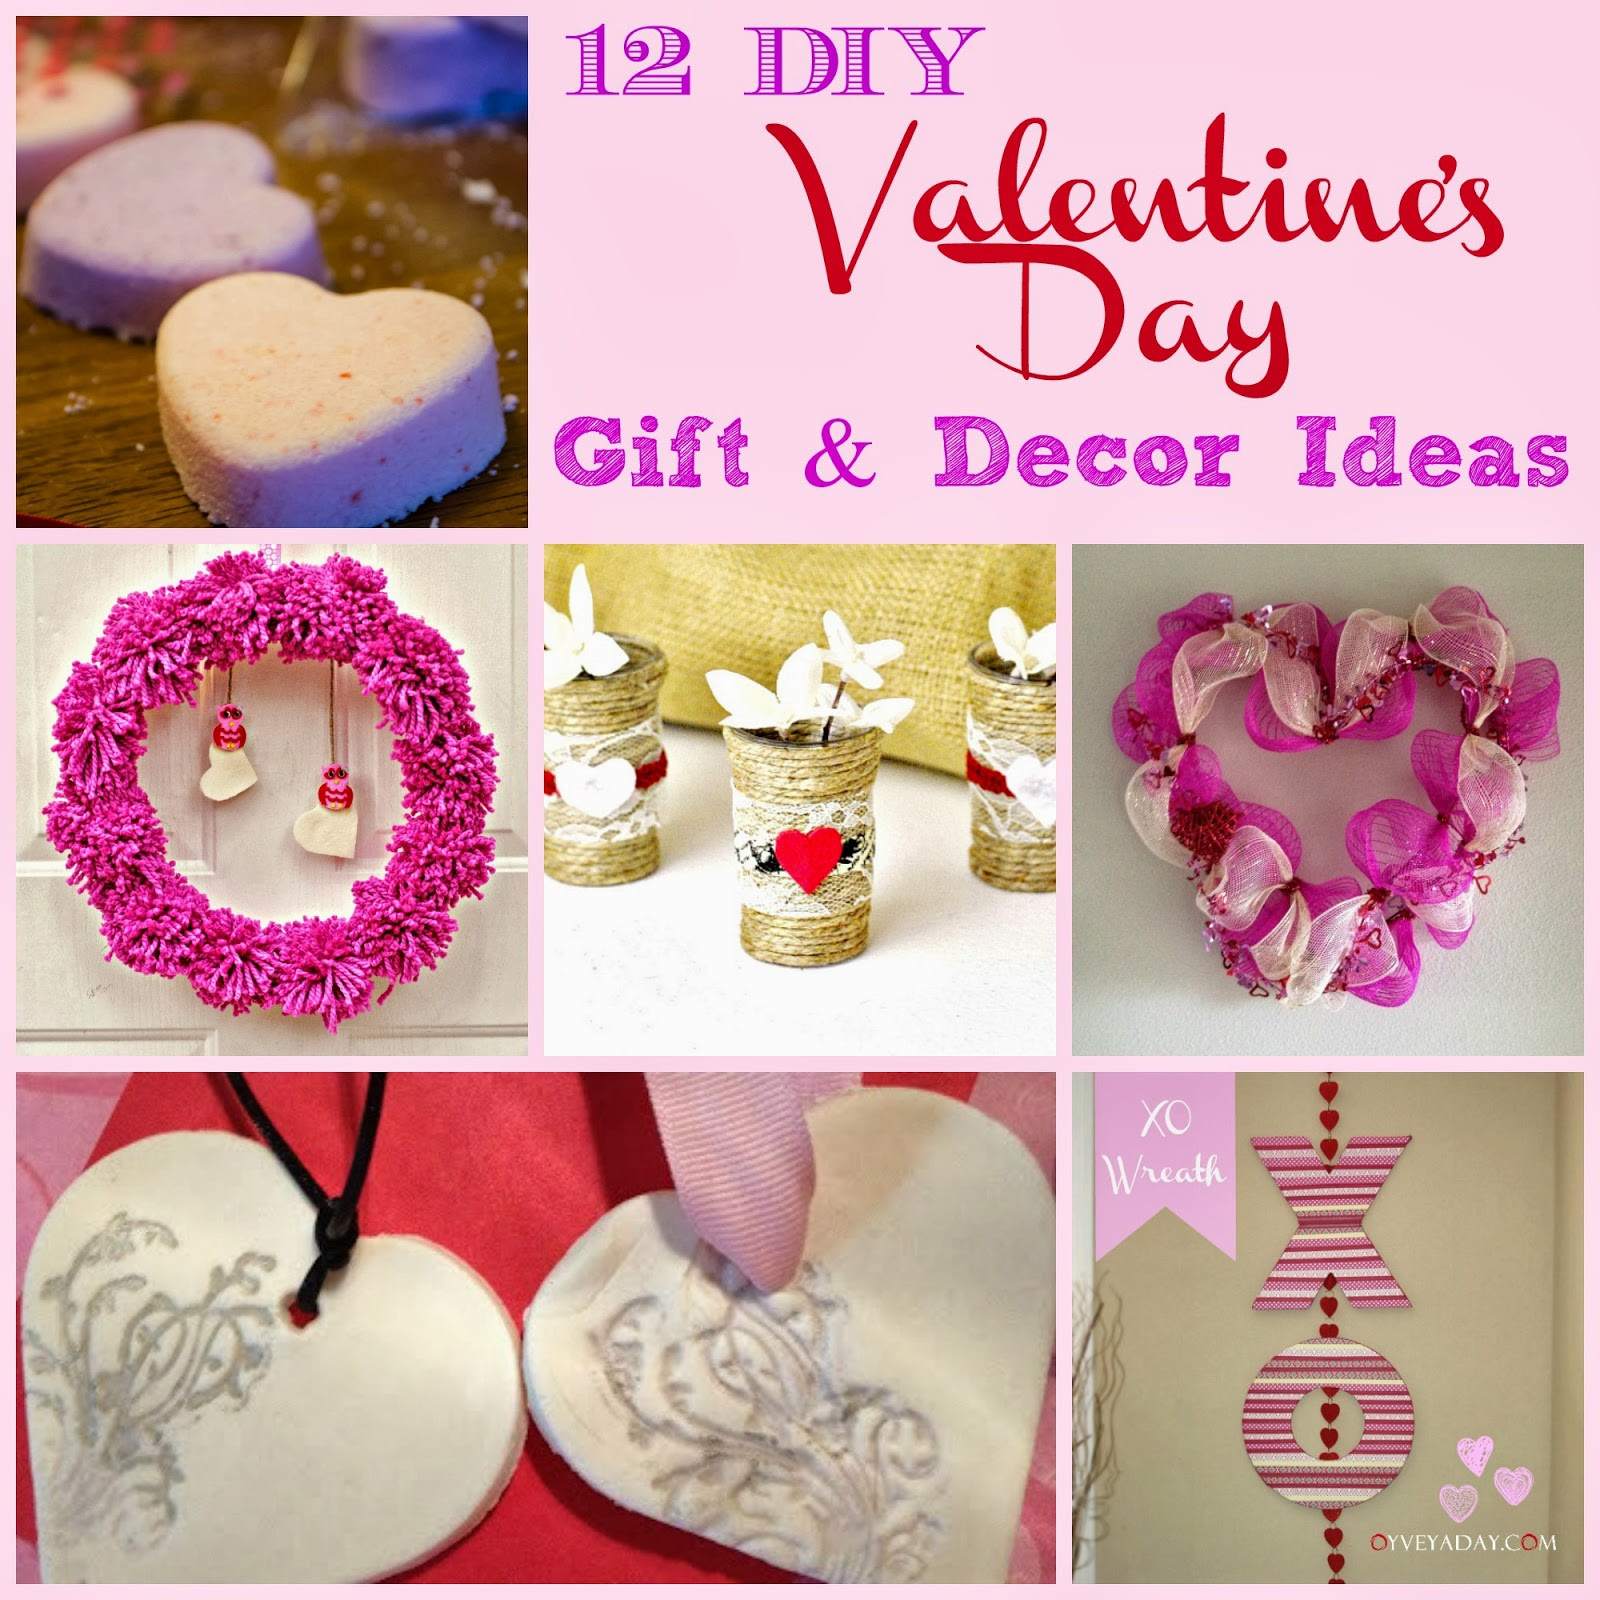 Diy Valentines Day Gifts
 12 DIY Valentine s Day Gift & Decor Ideas Outnumbered 3 to 1